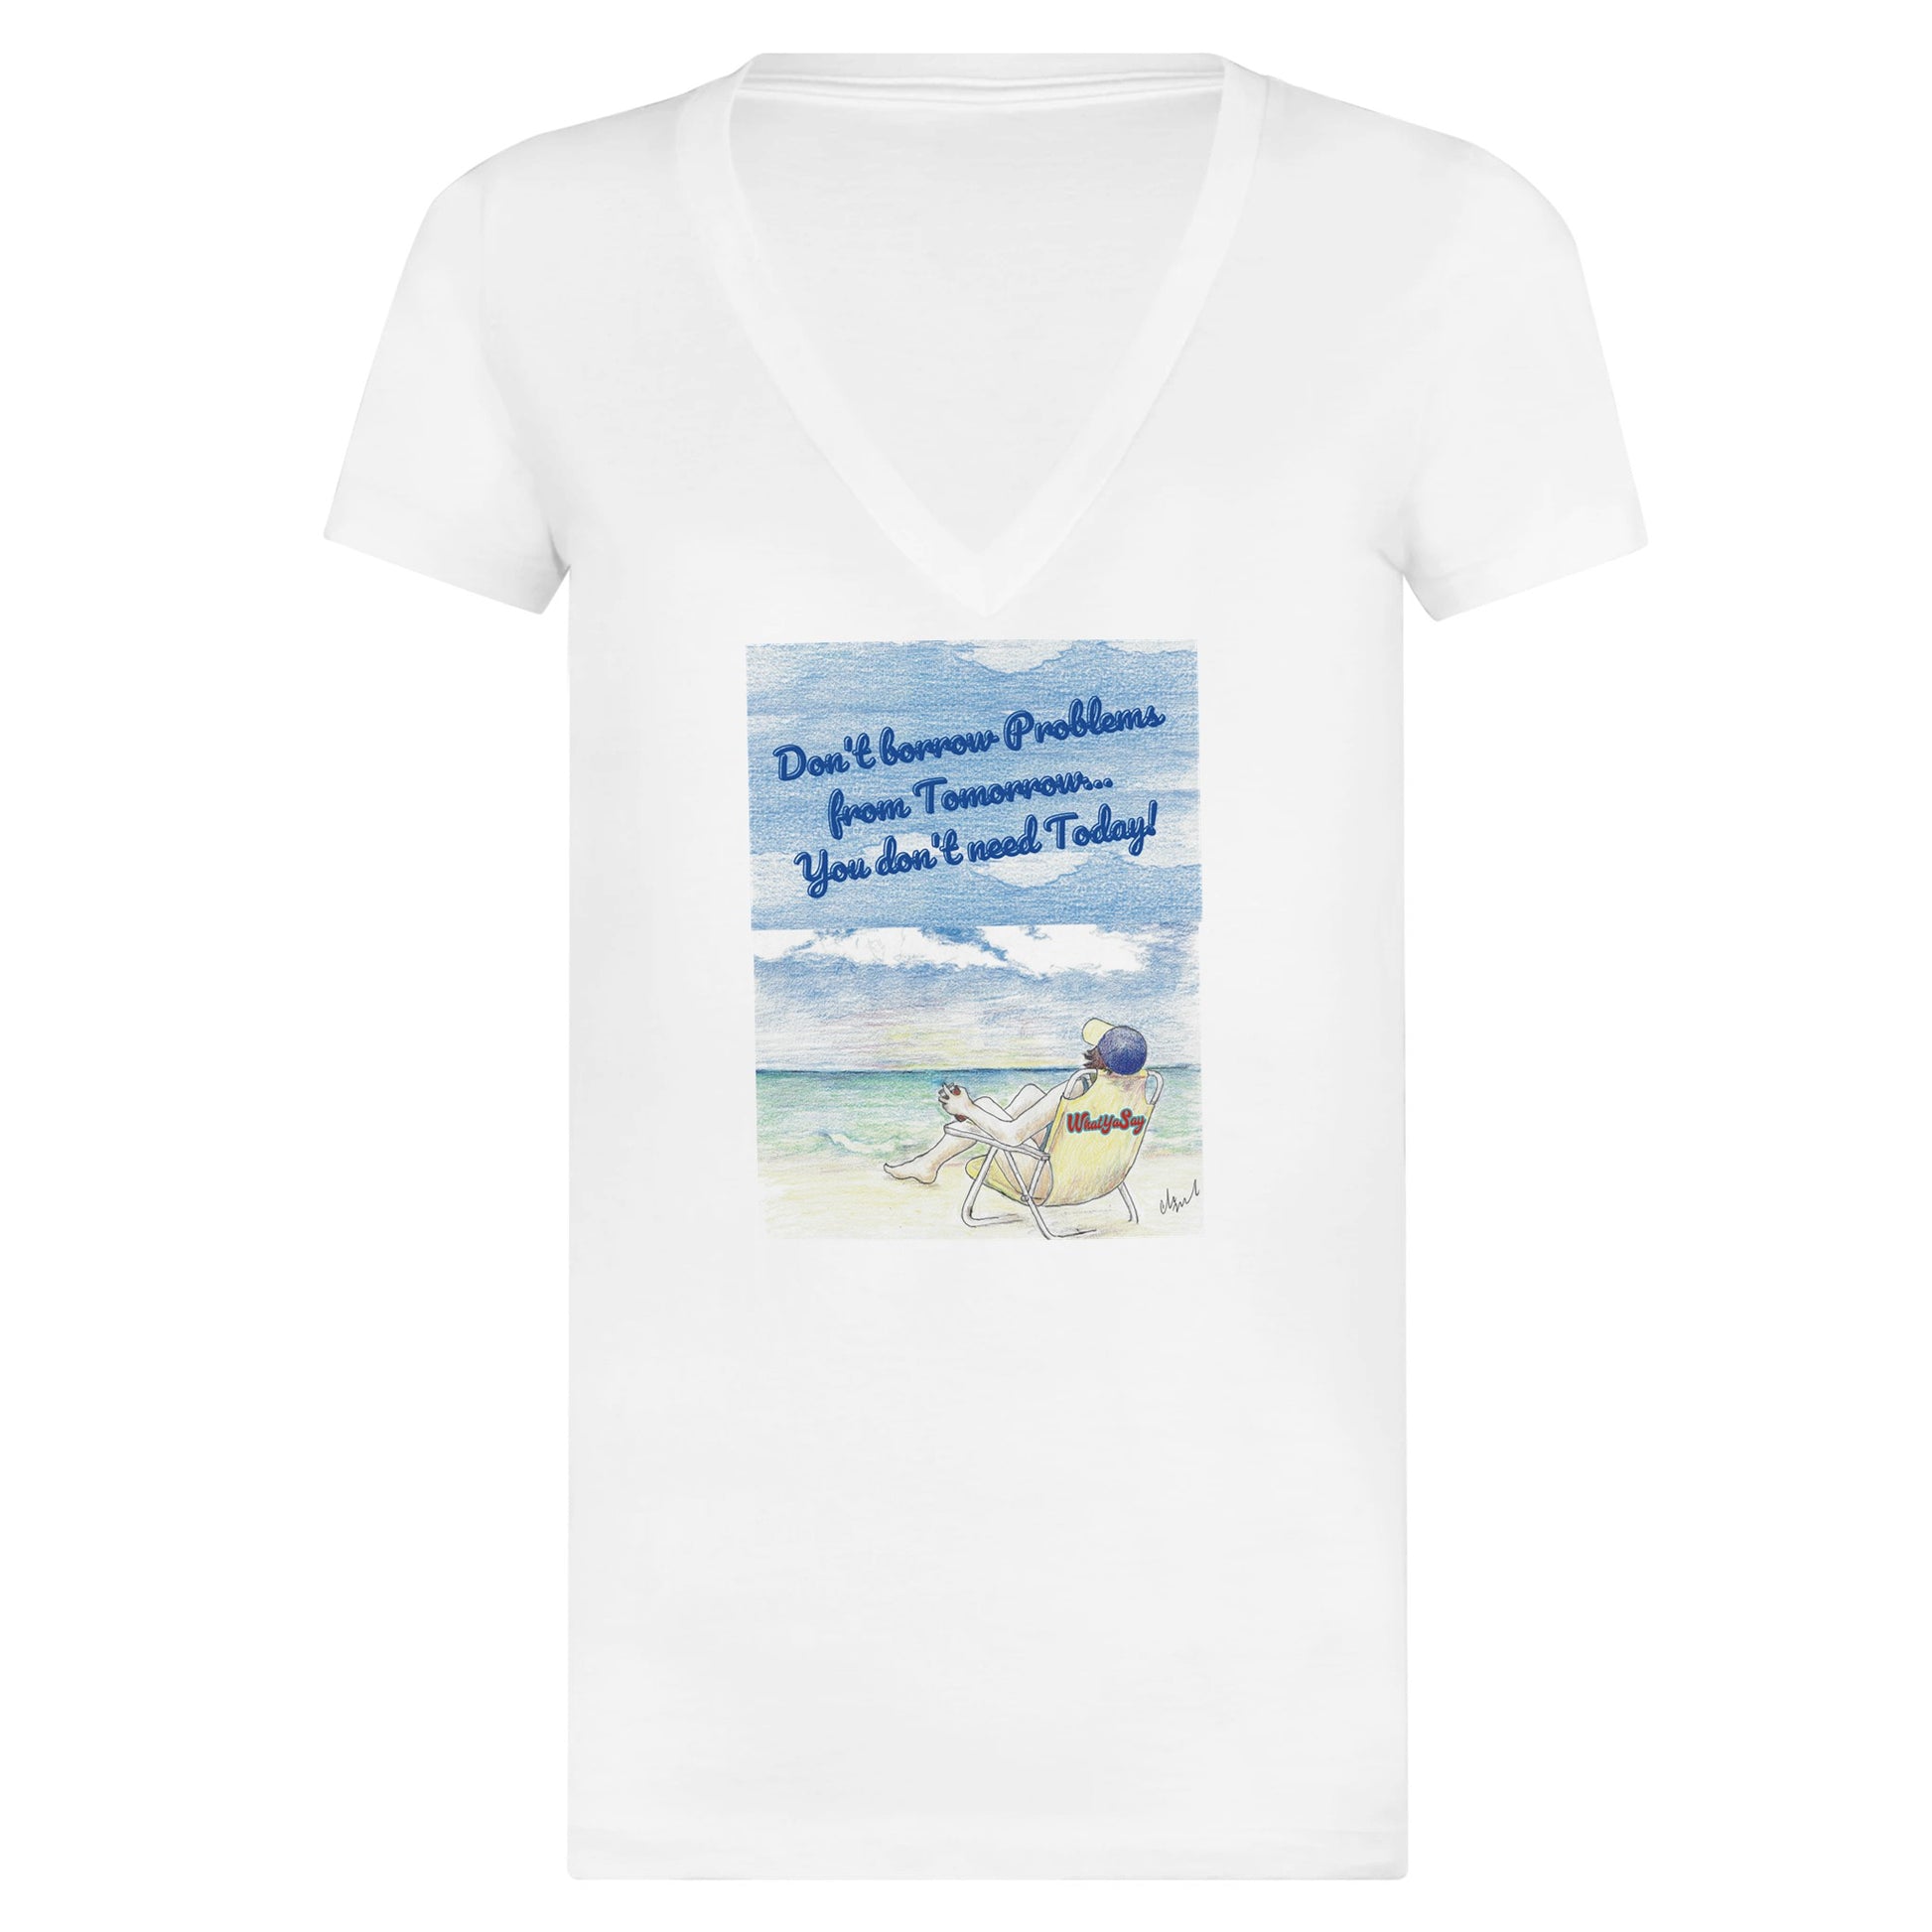 A premium women’s V-neck t-shirt with original logo Don’t borrow Problems from Tomorrow… You don’t need Today!  on front from WhatYa Say Apparel made from combed and ring-spun cotton lying flat.